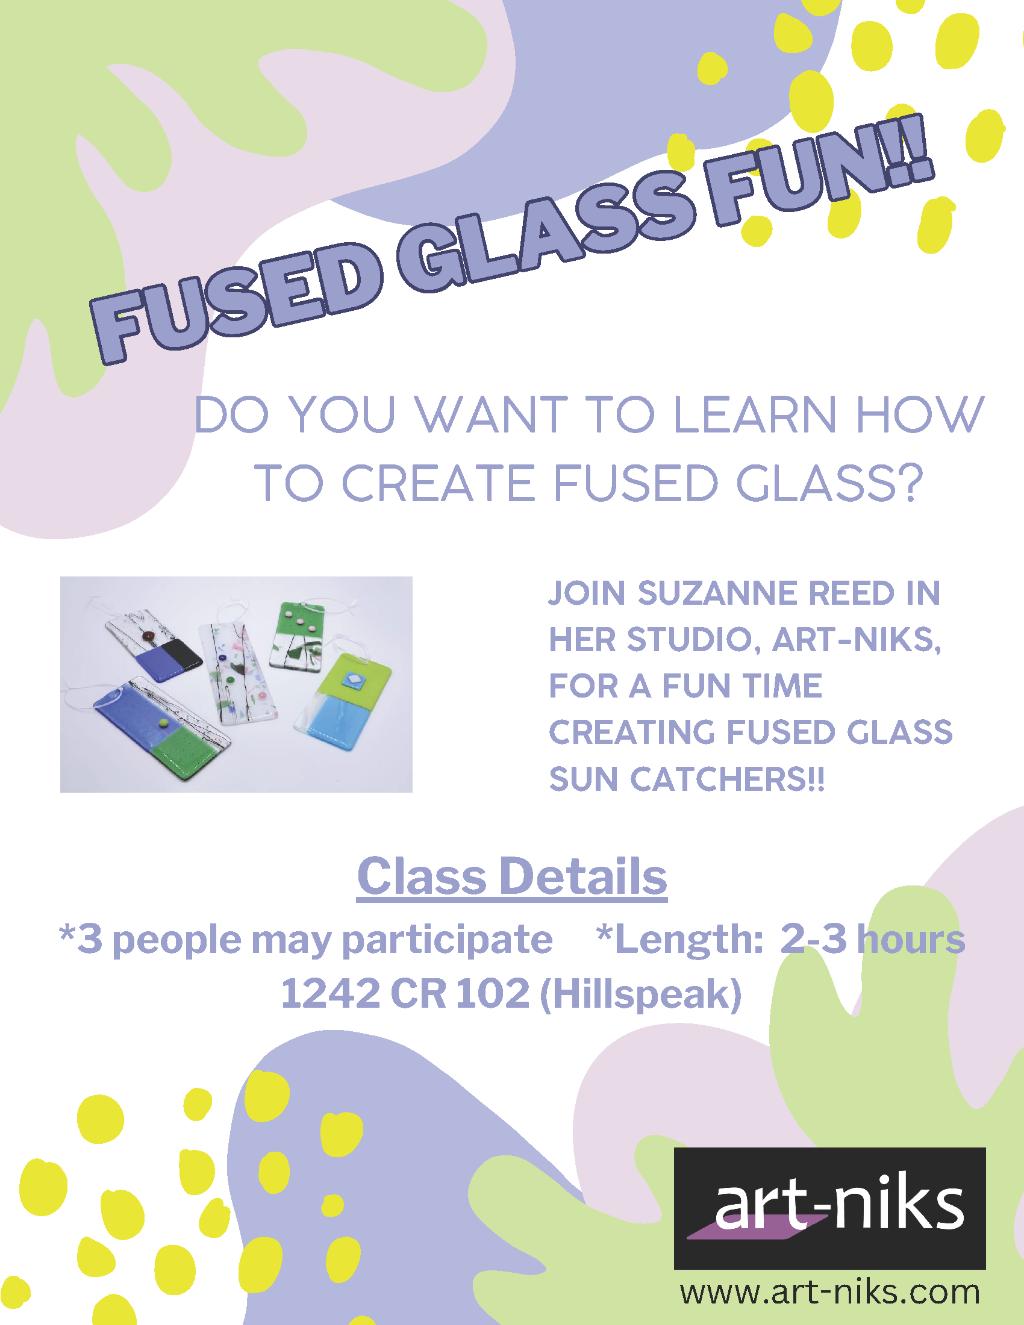 ''Fused Glass Fun Class'' by Suzanne Reed